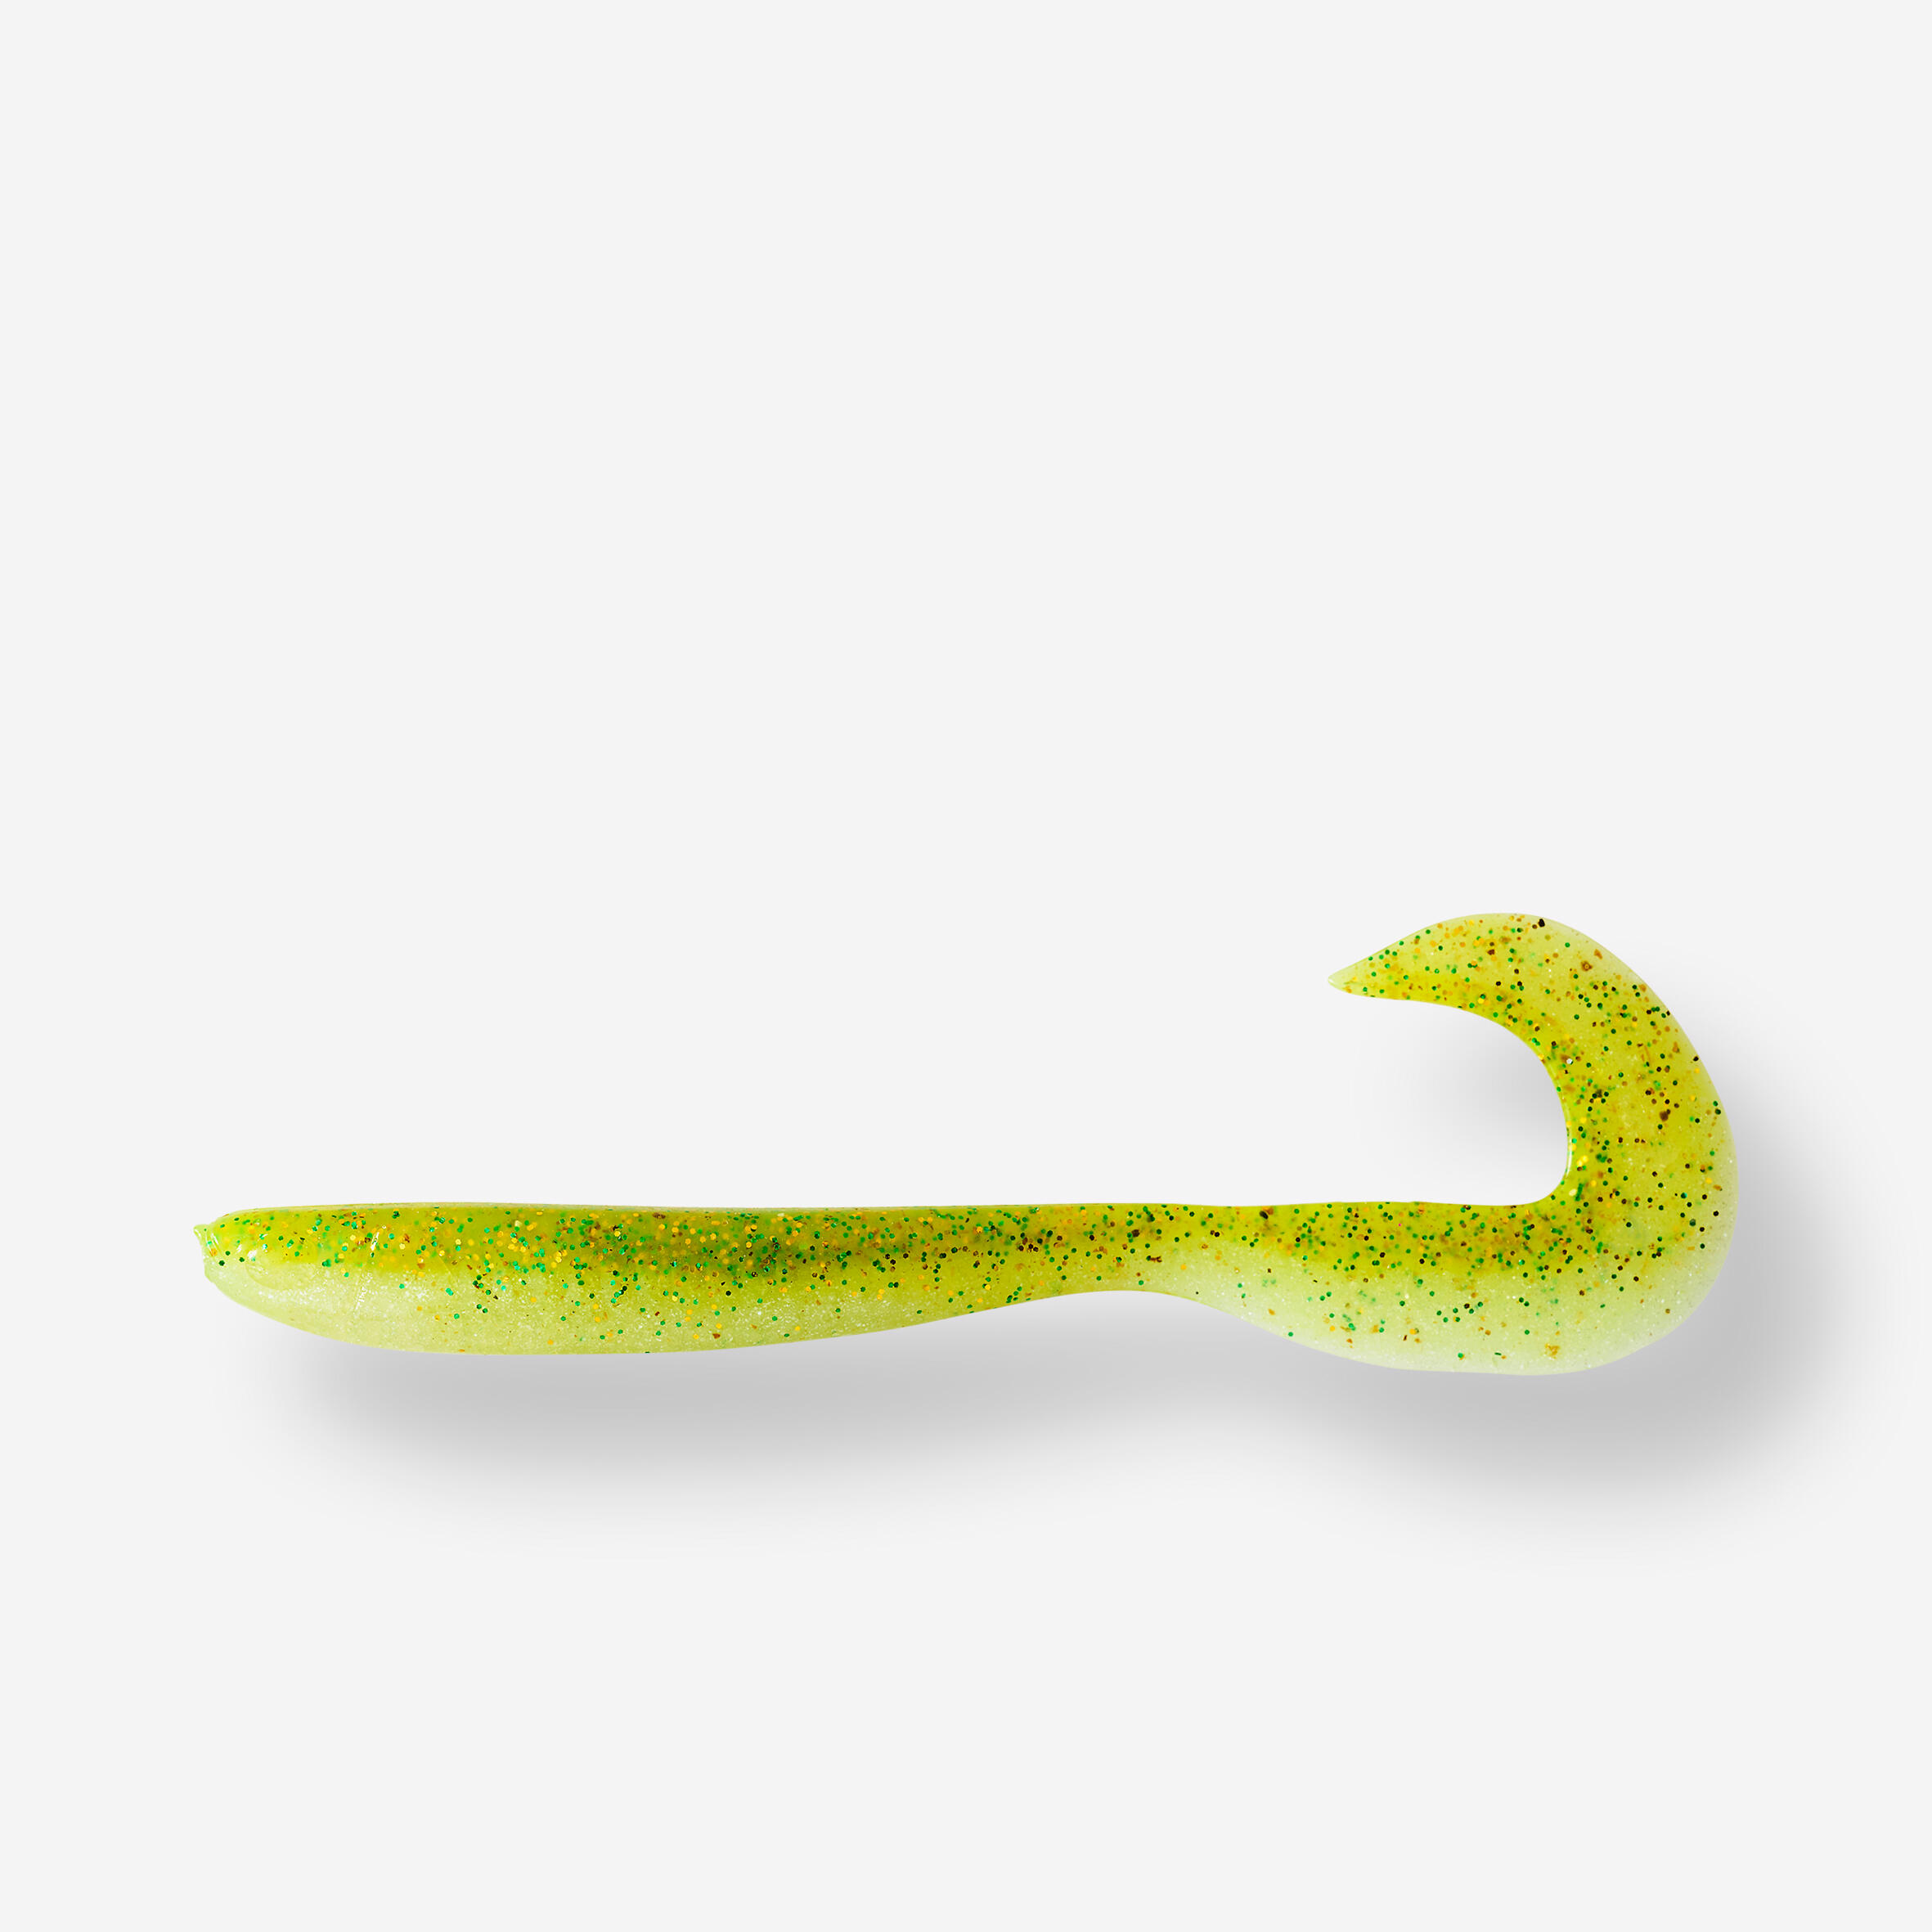 GRUB SHAPED SOFT LURE WITH ATTRACTANT WXM YUBARI GRB 90 CHARTREUSE 1/6